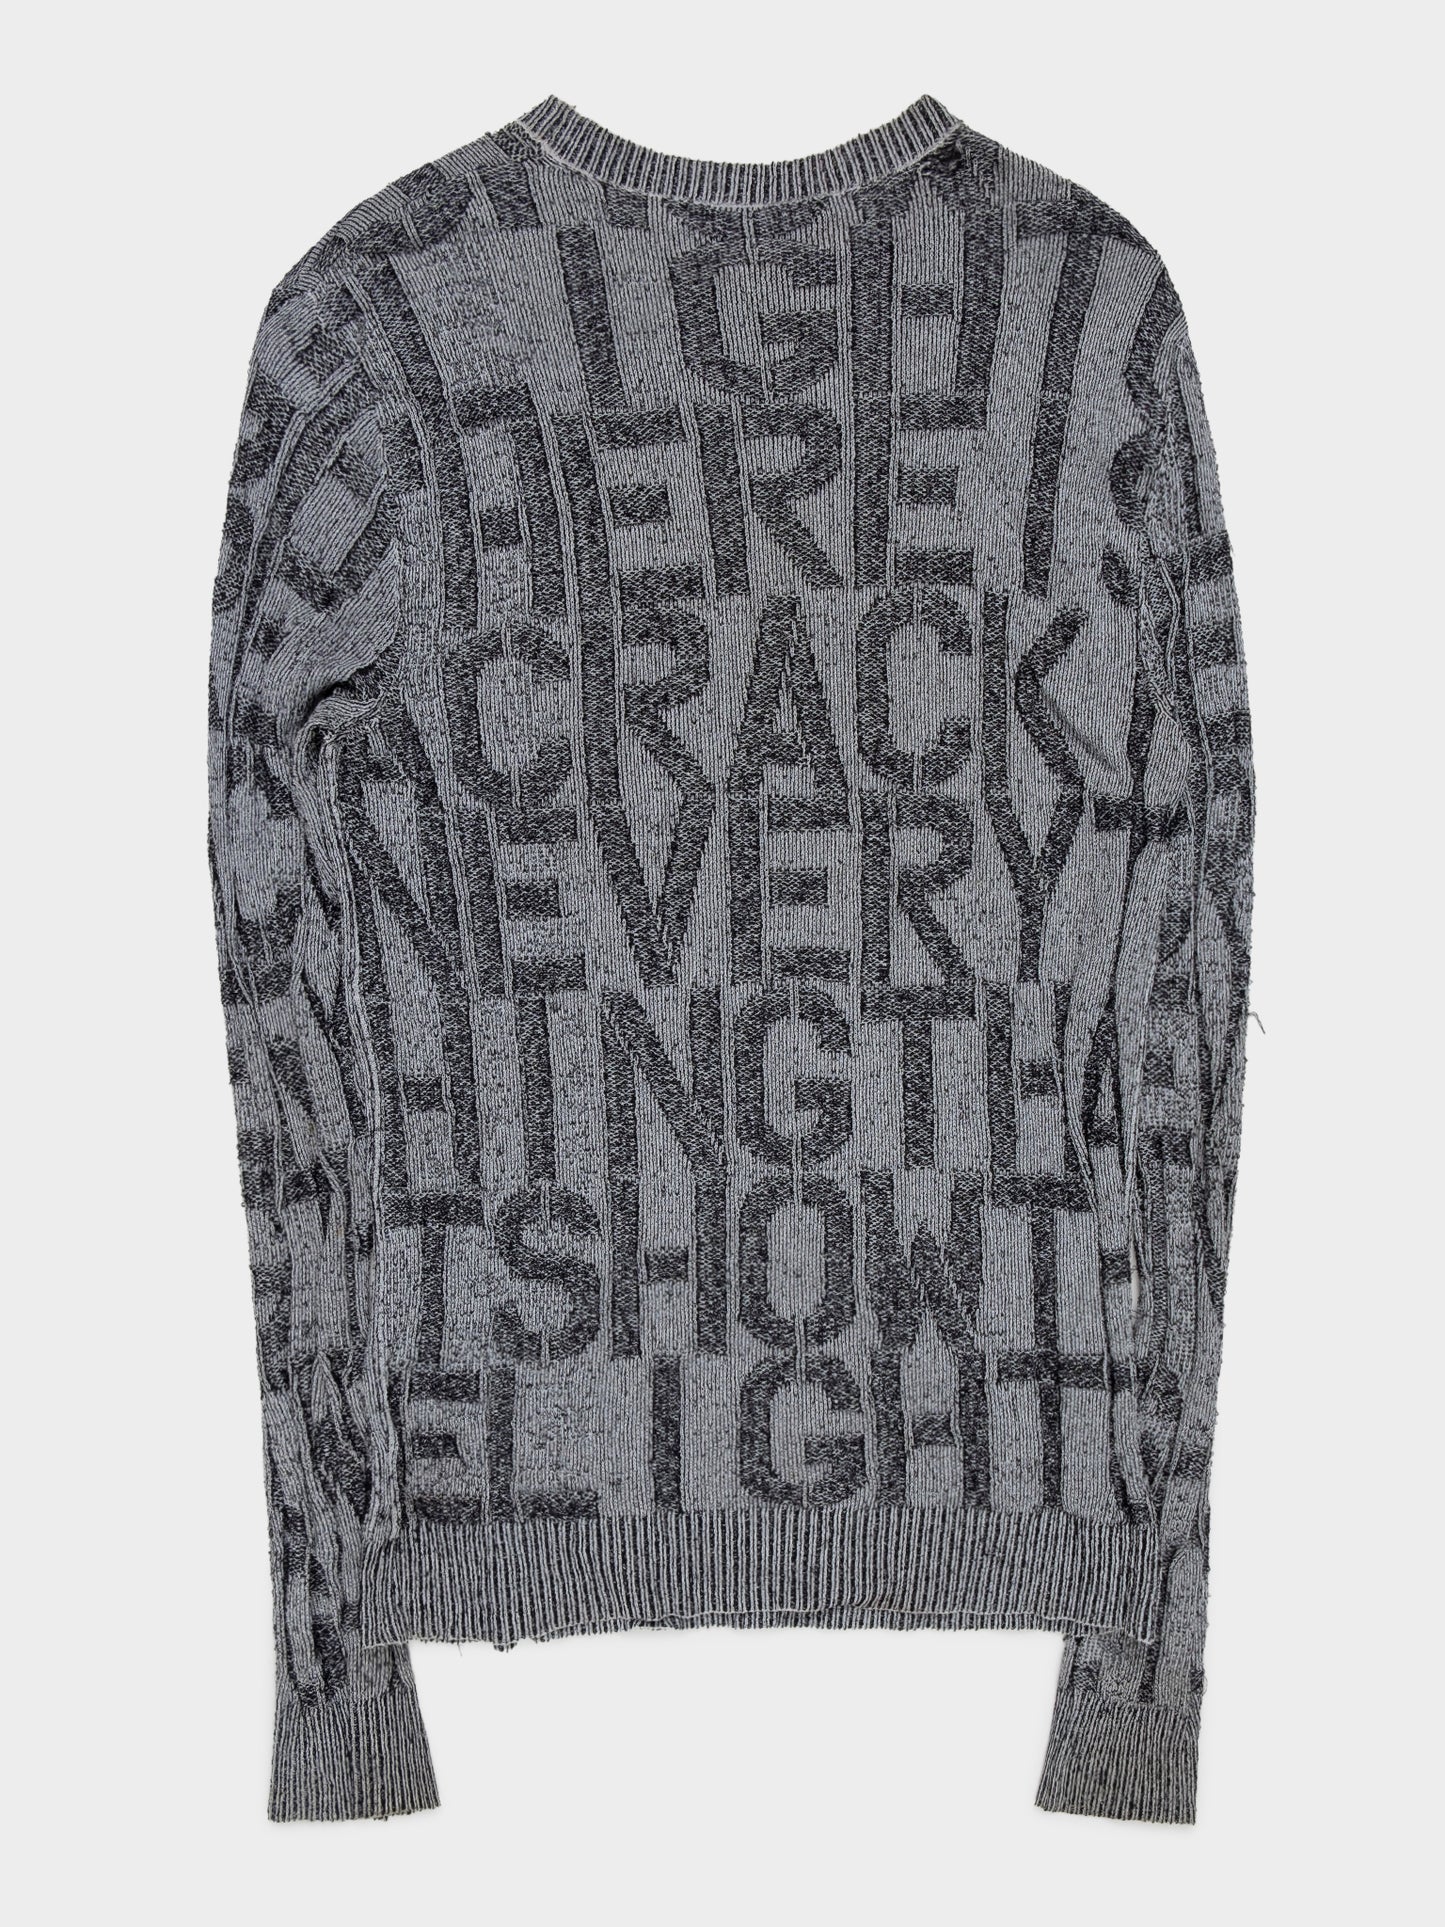 Christopher Wool Knit